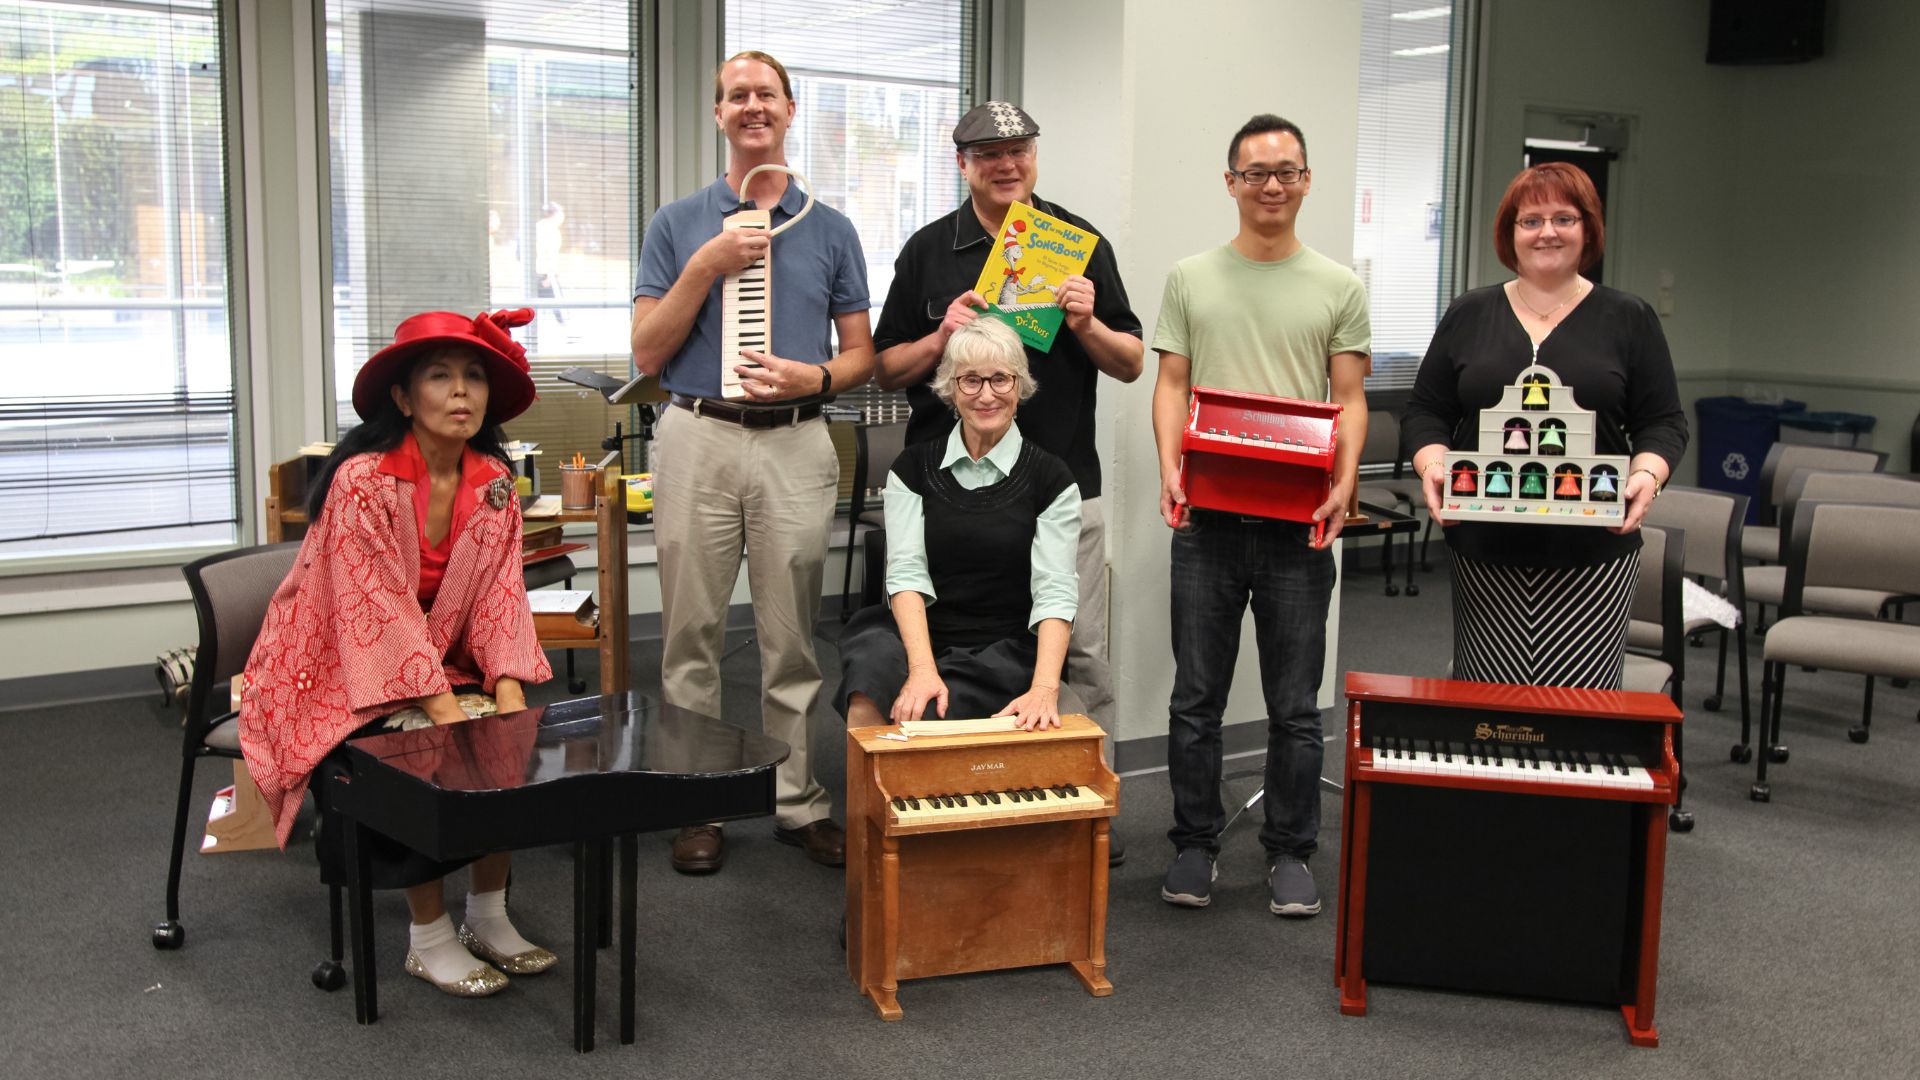 Toy Piano Festival performers pose for a photo at the San Diego Central Library.